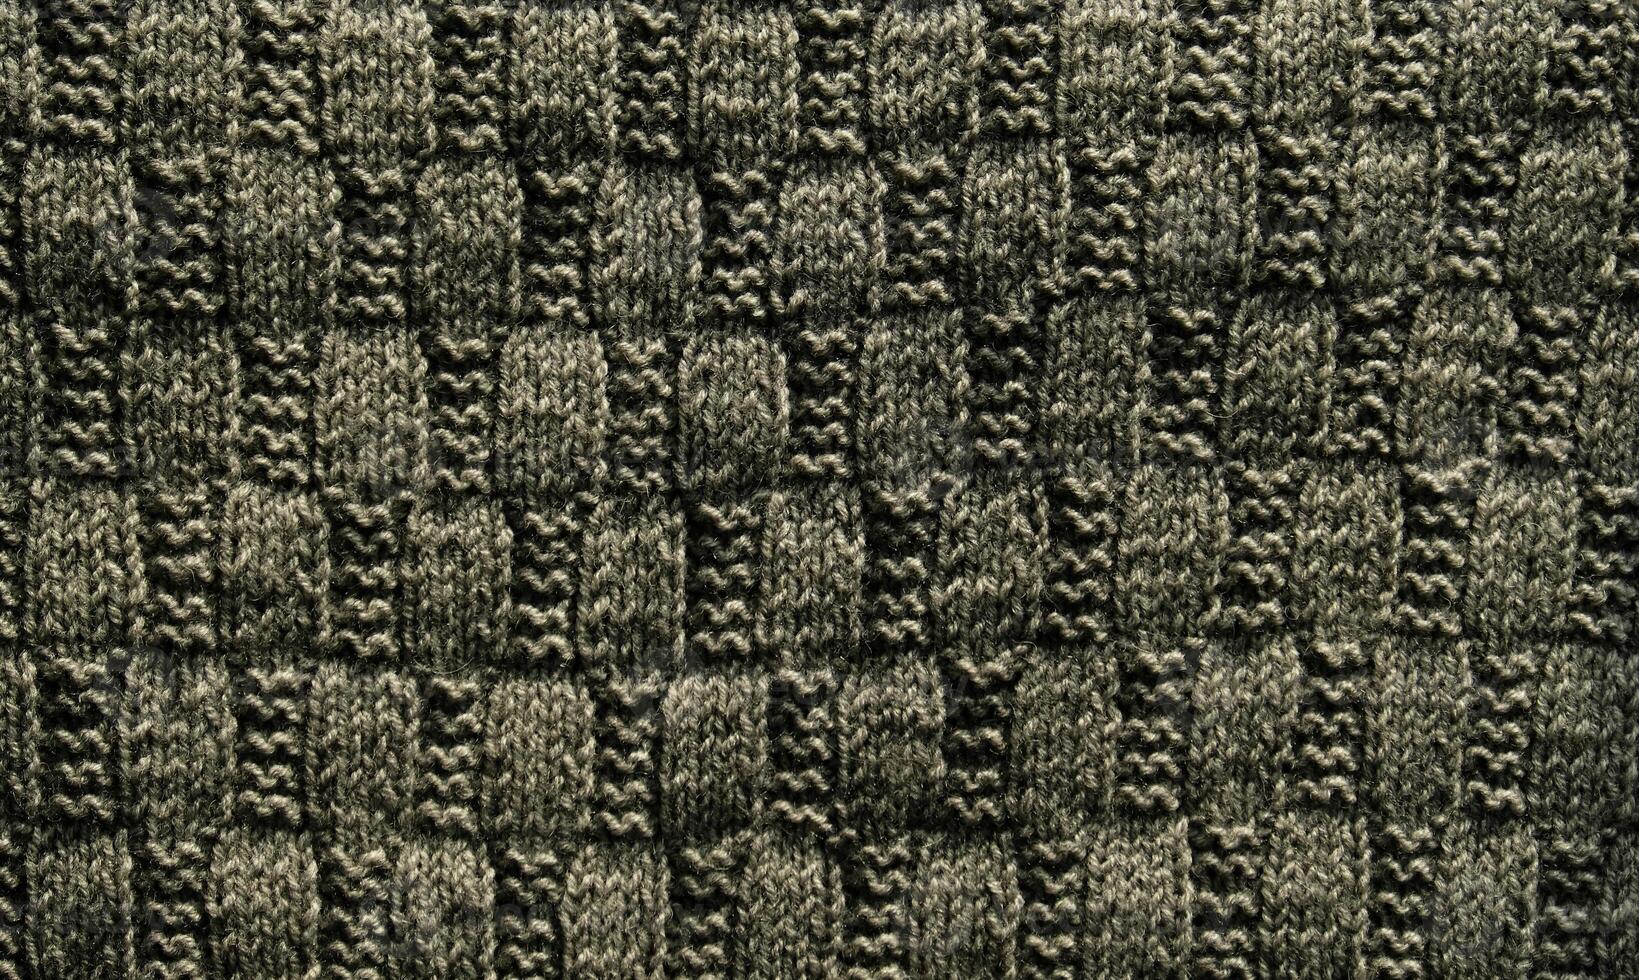 Background with gray knitted leaf shape, knitting pattern with cables. Top view, close-up. Handmade knitting wool photo